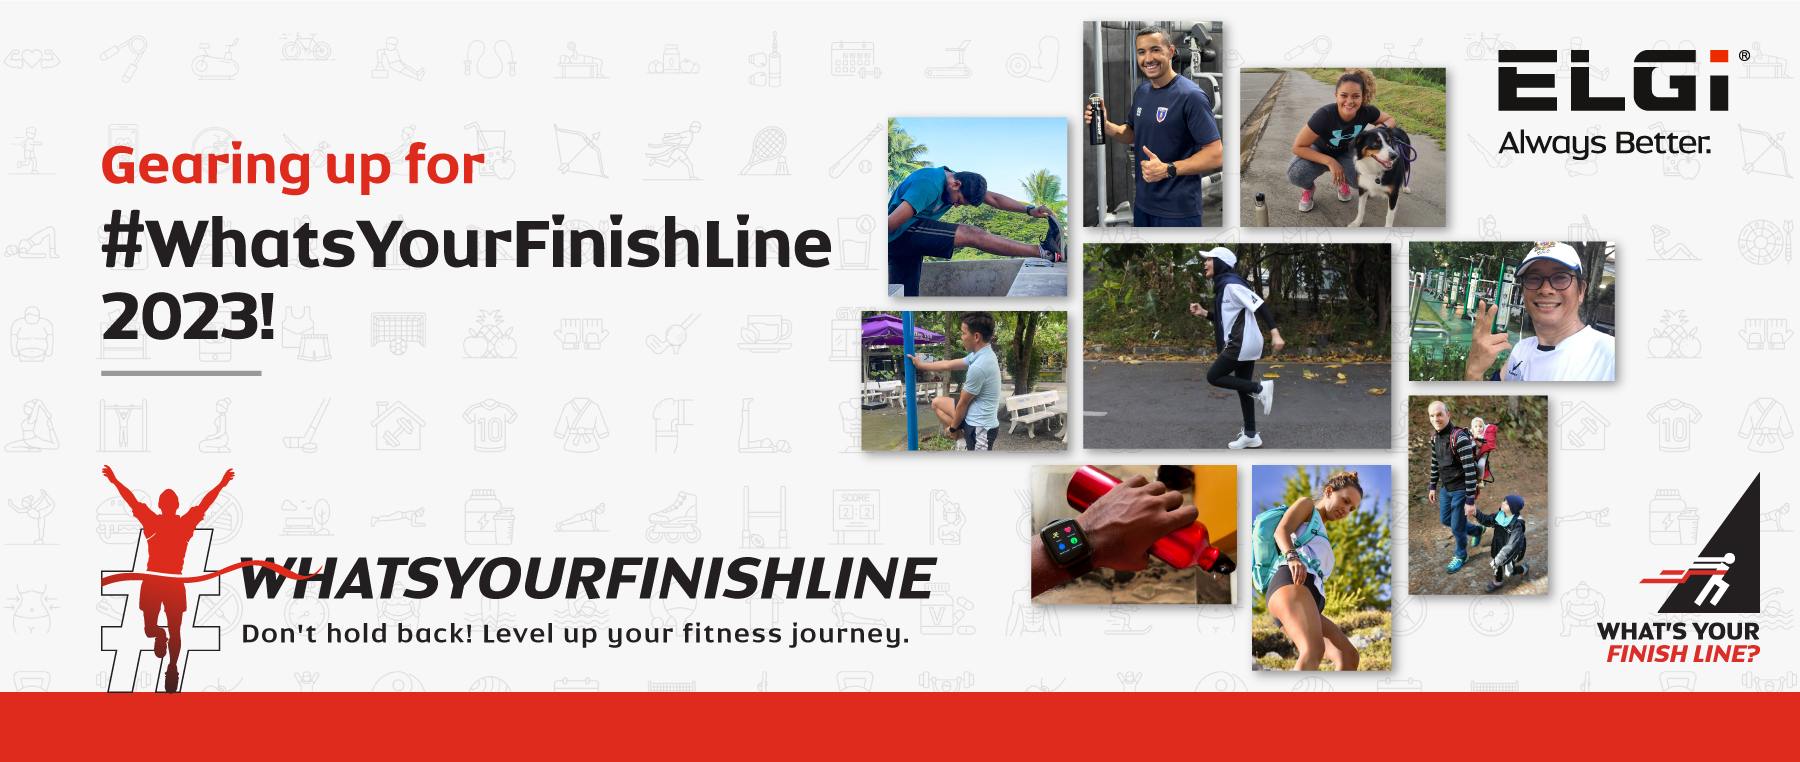 Gearing Up for #WhatsYourFinishLine 2023!